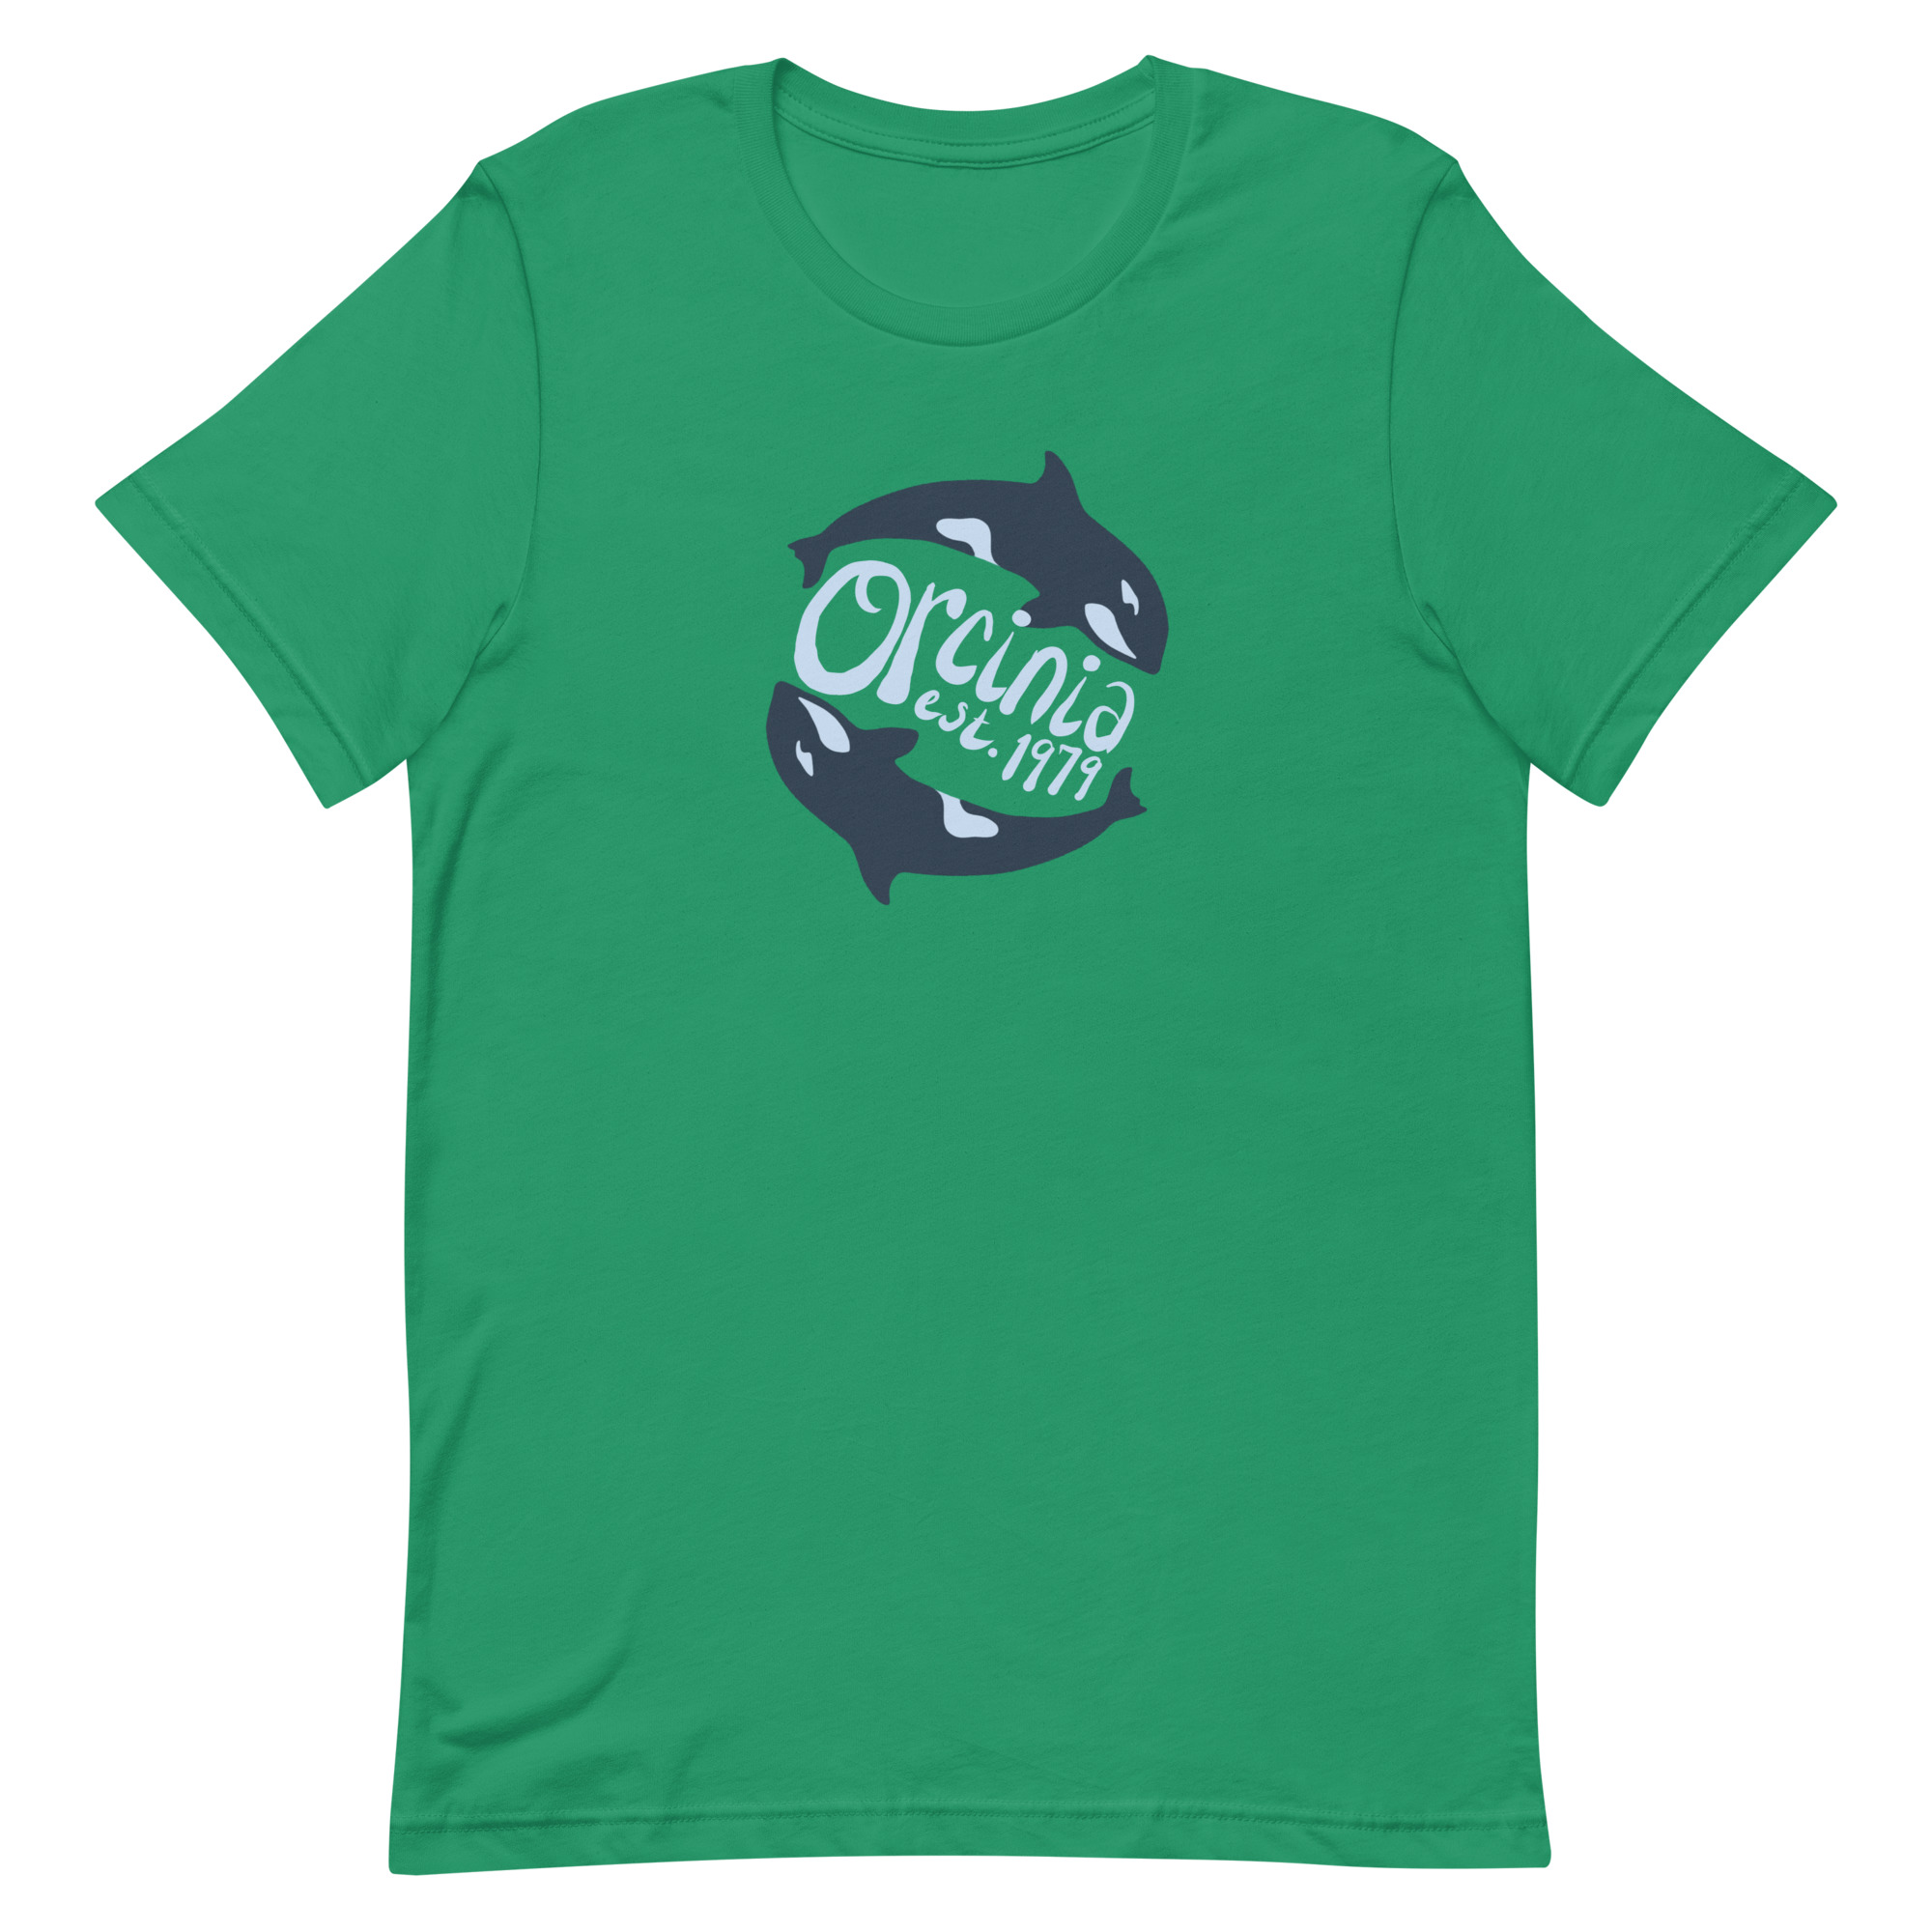 Kelly green short-sleeve t-shirt featuring two orca whales swimming in a circle. Text between them reads "Orcinia, est. 1979."